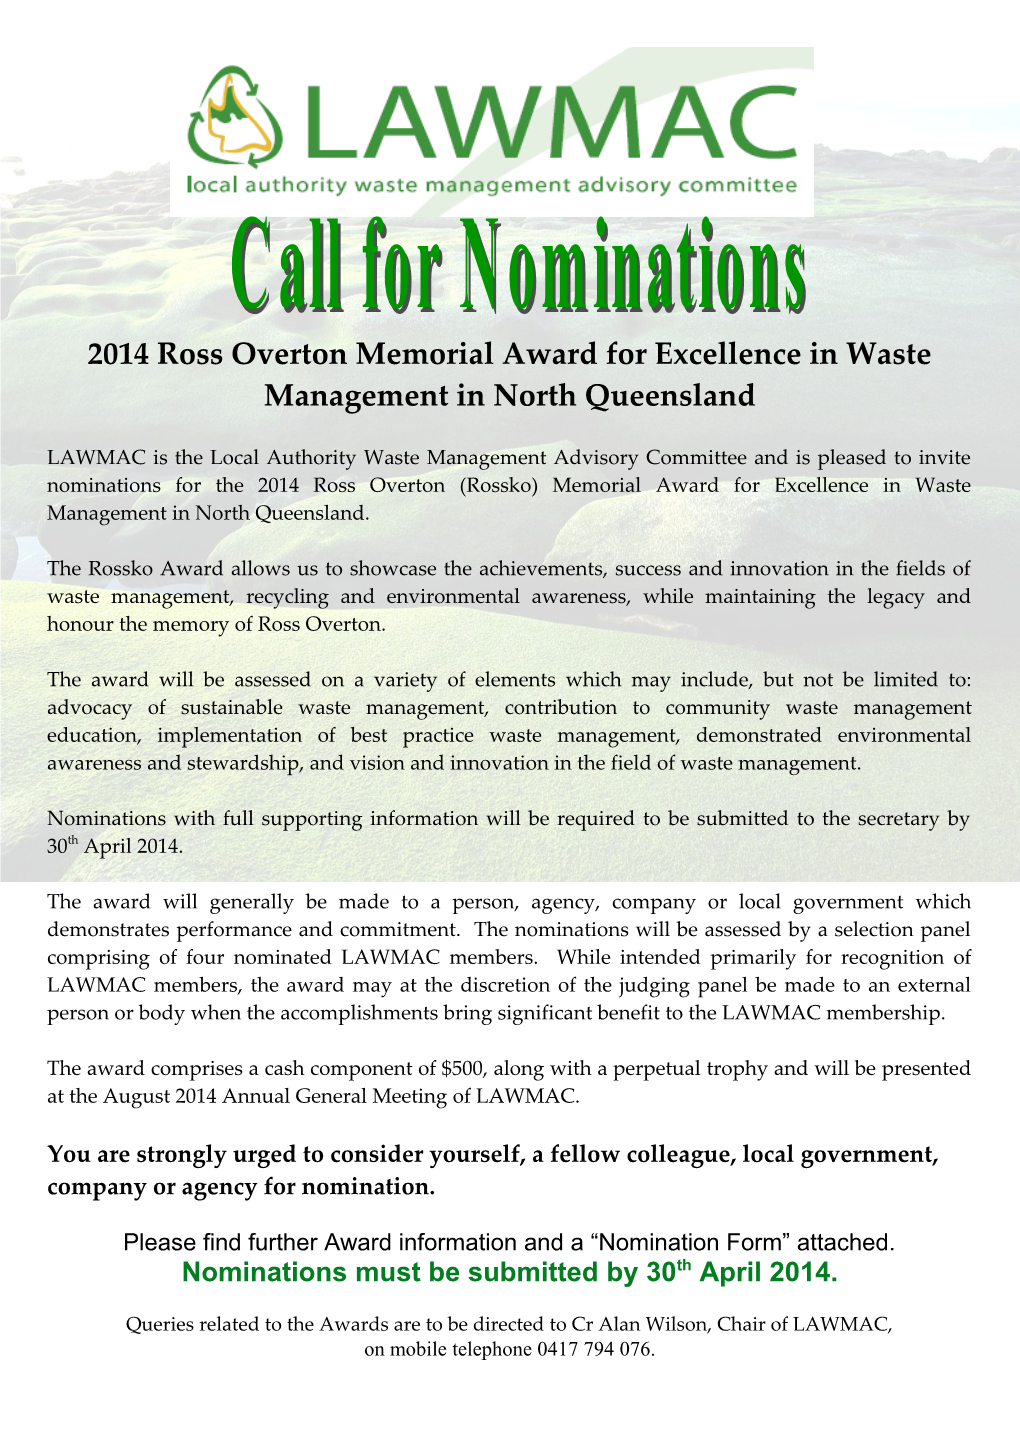 2014 Ross Overton Memorial Award for Excellence in Waste Management in North Queensland